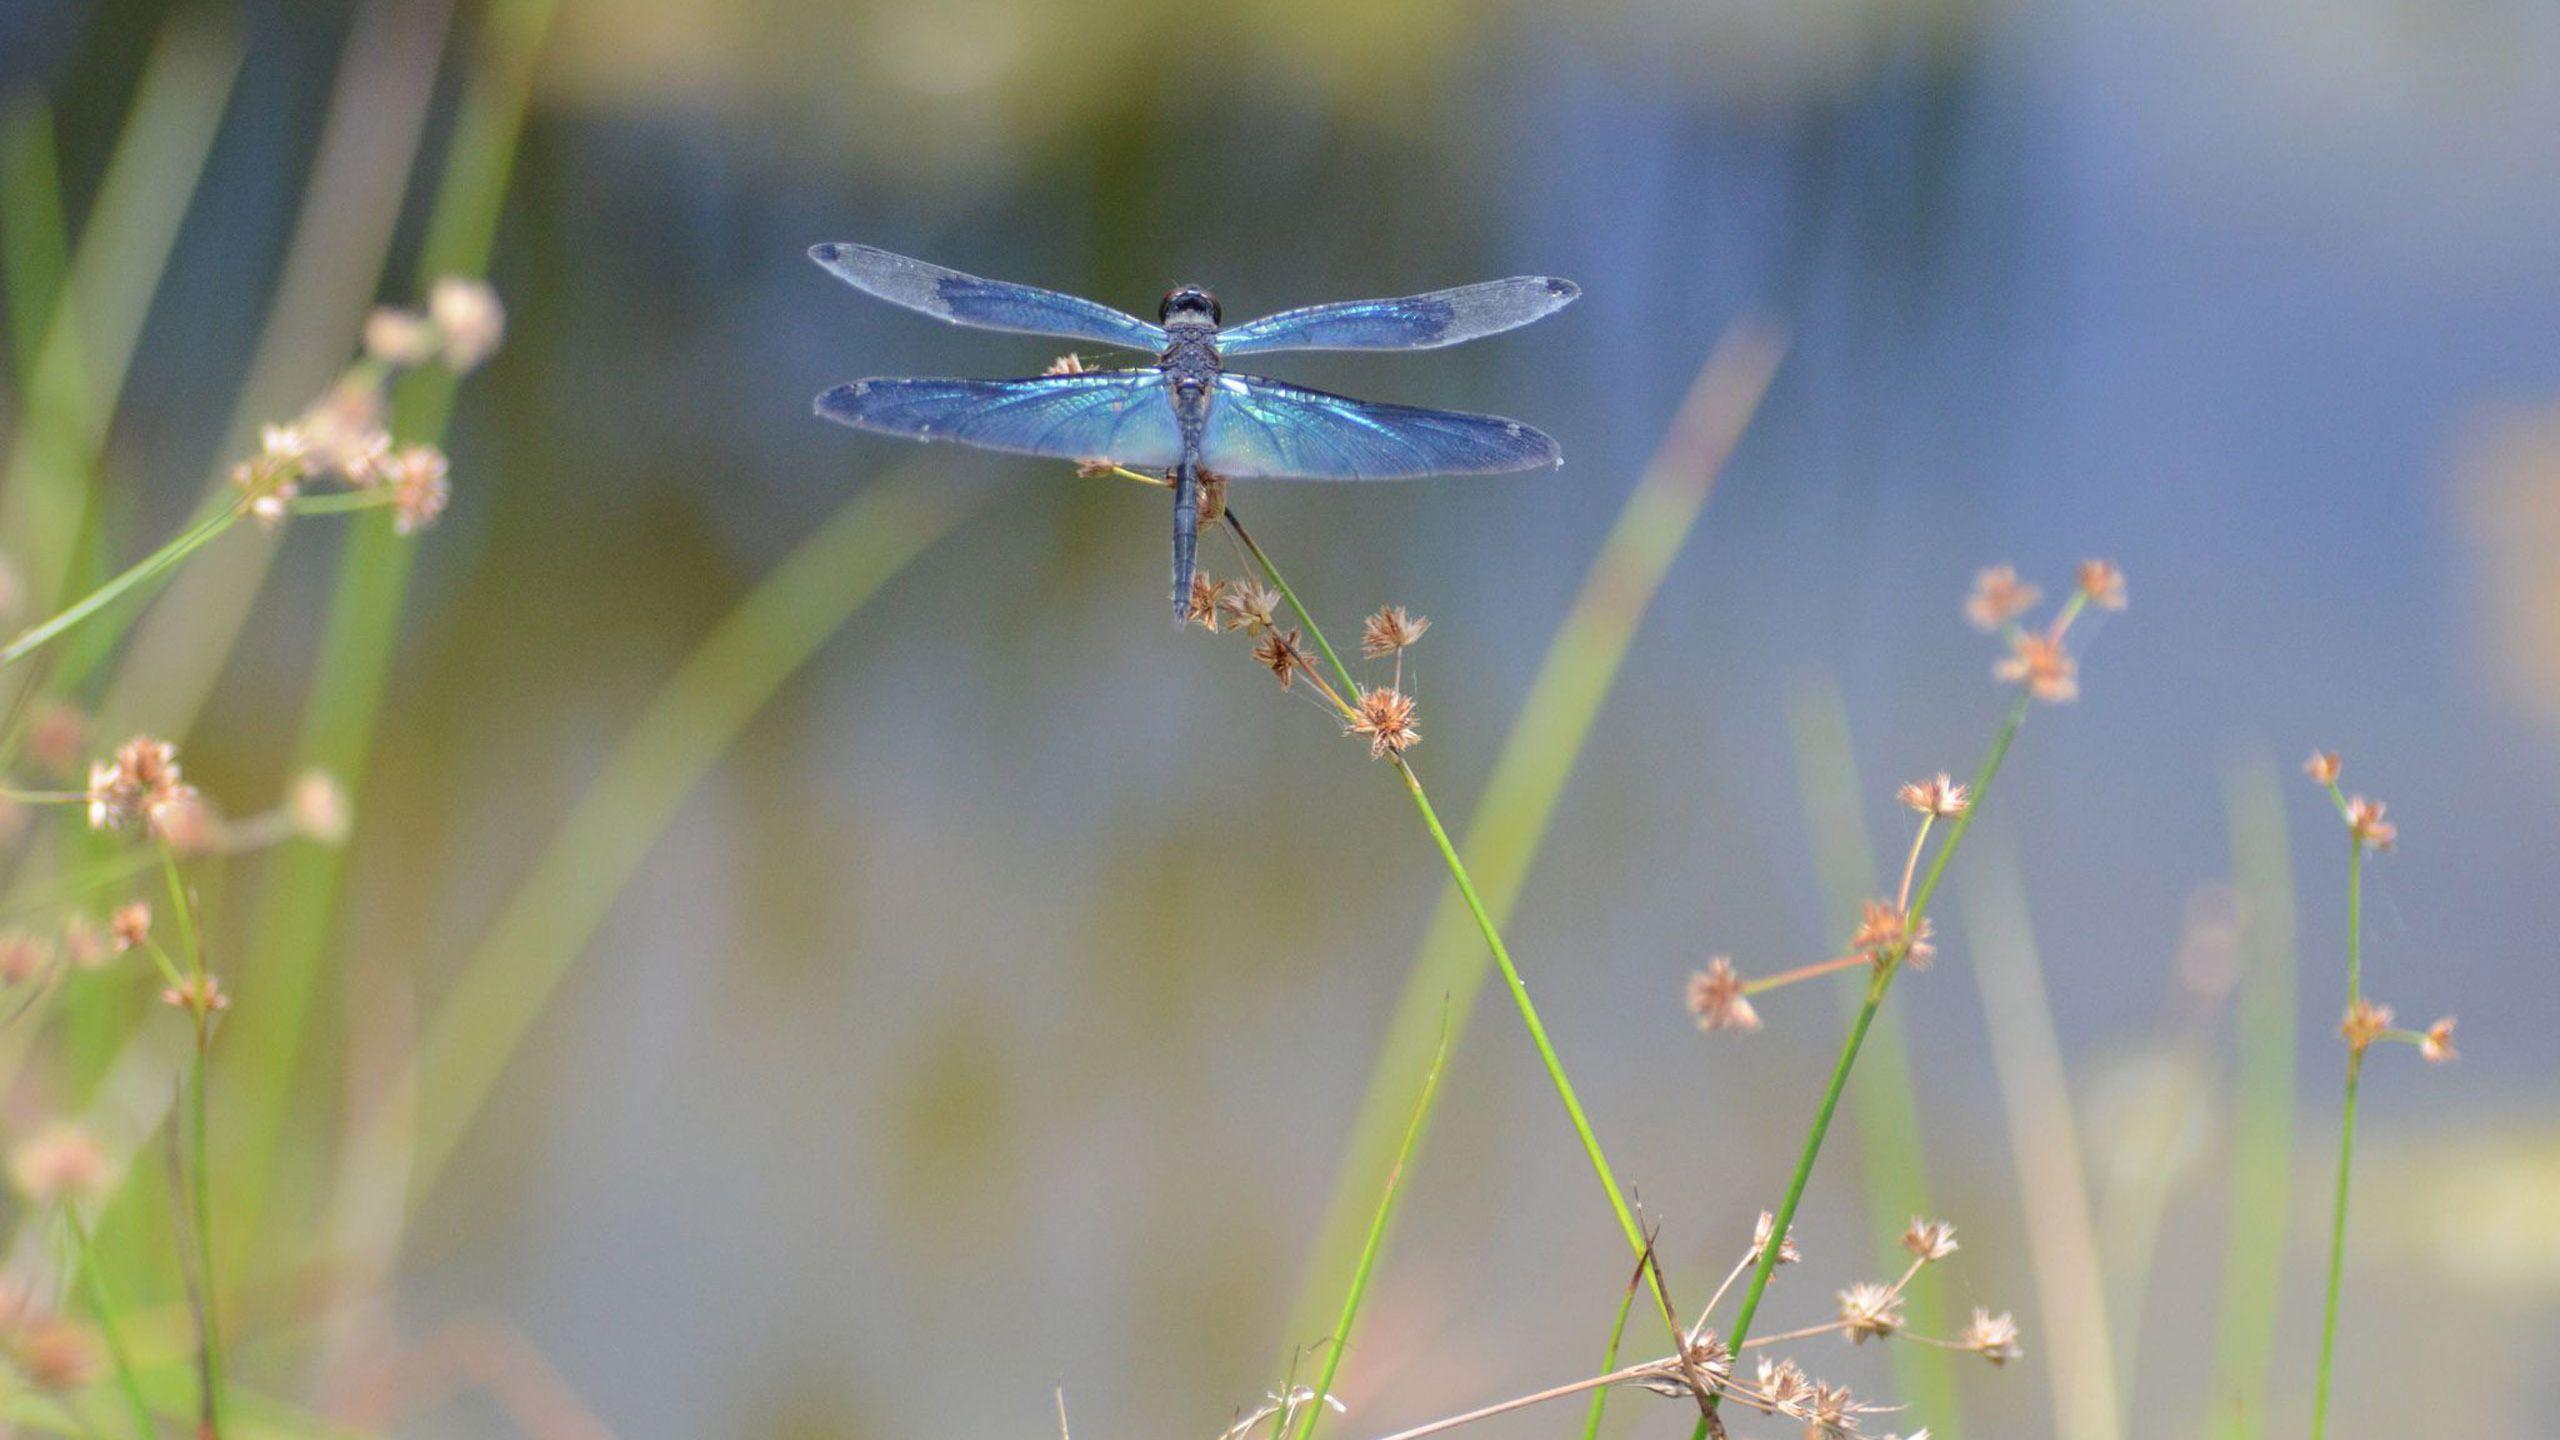 Dragonfly Image, Wallpaper and Picture